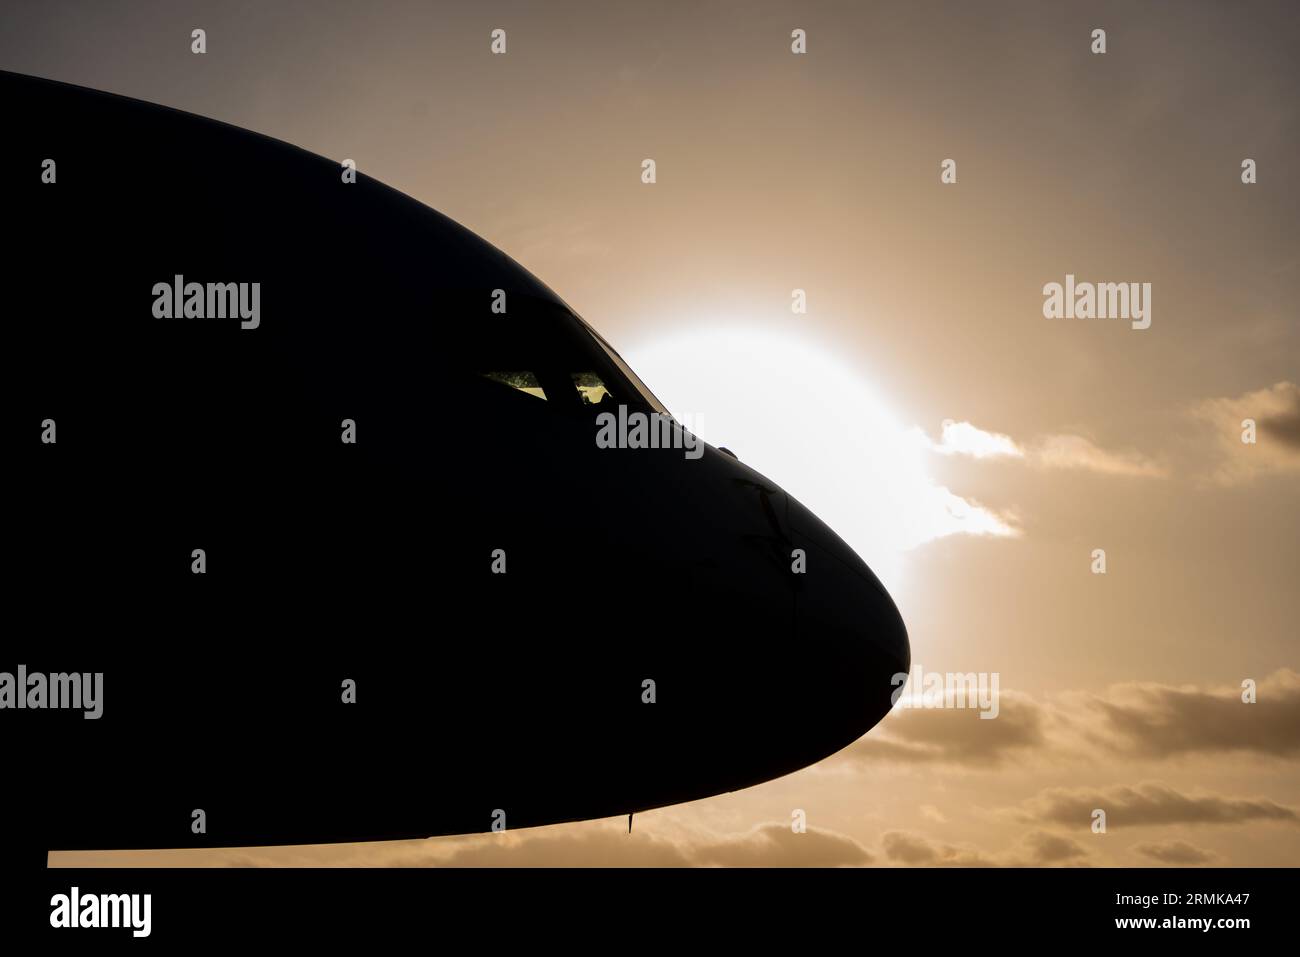 Silhouette of the front profile of a commercial aircraft against a orange setting sun Stock Photo